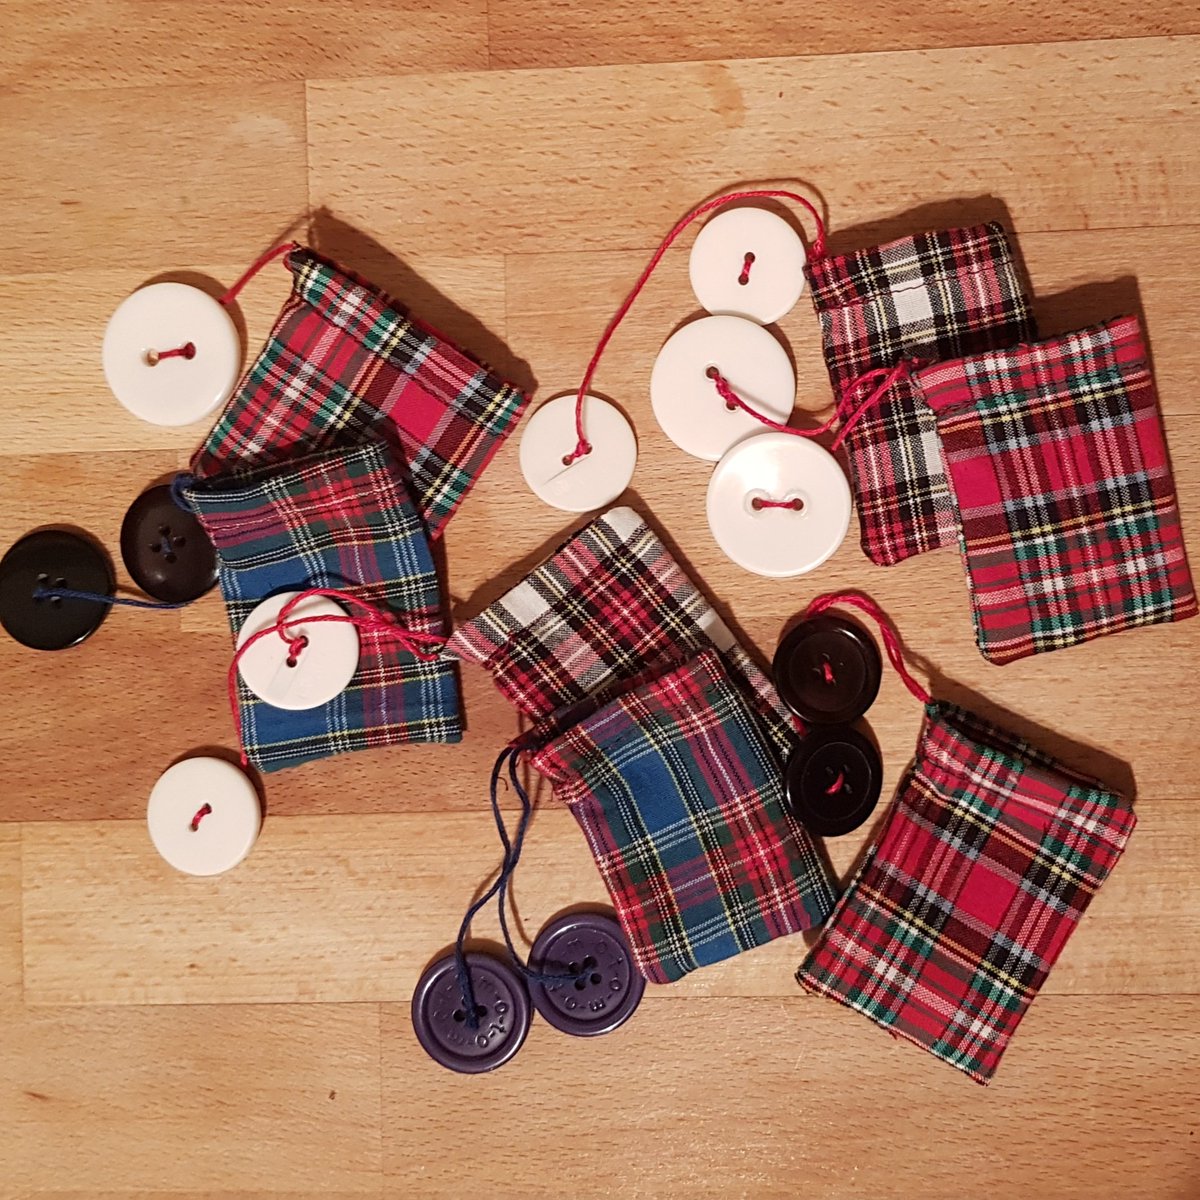 Reusable tartan teabags! Hoping these will be nice with my tablet and some yummy tea as xmas gifts. 😁☕ #xmascrafts #reducereuserecycle #crafters #cuppa